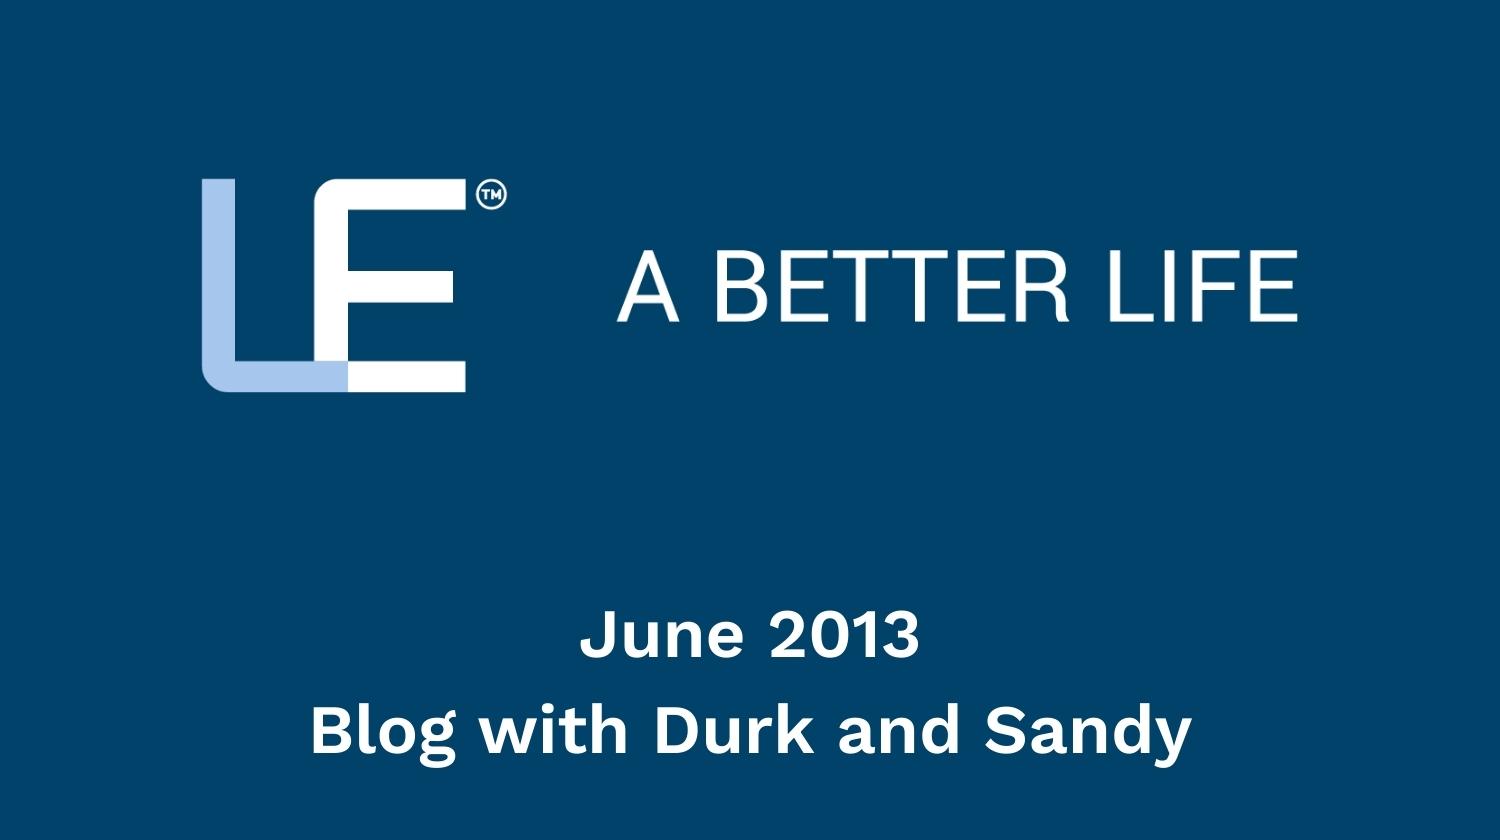 June 2013 Blog with Durk and Sandy